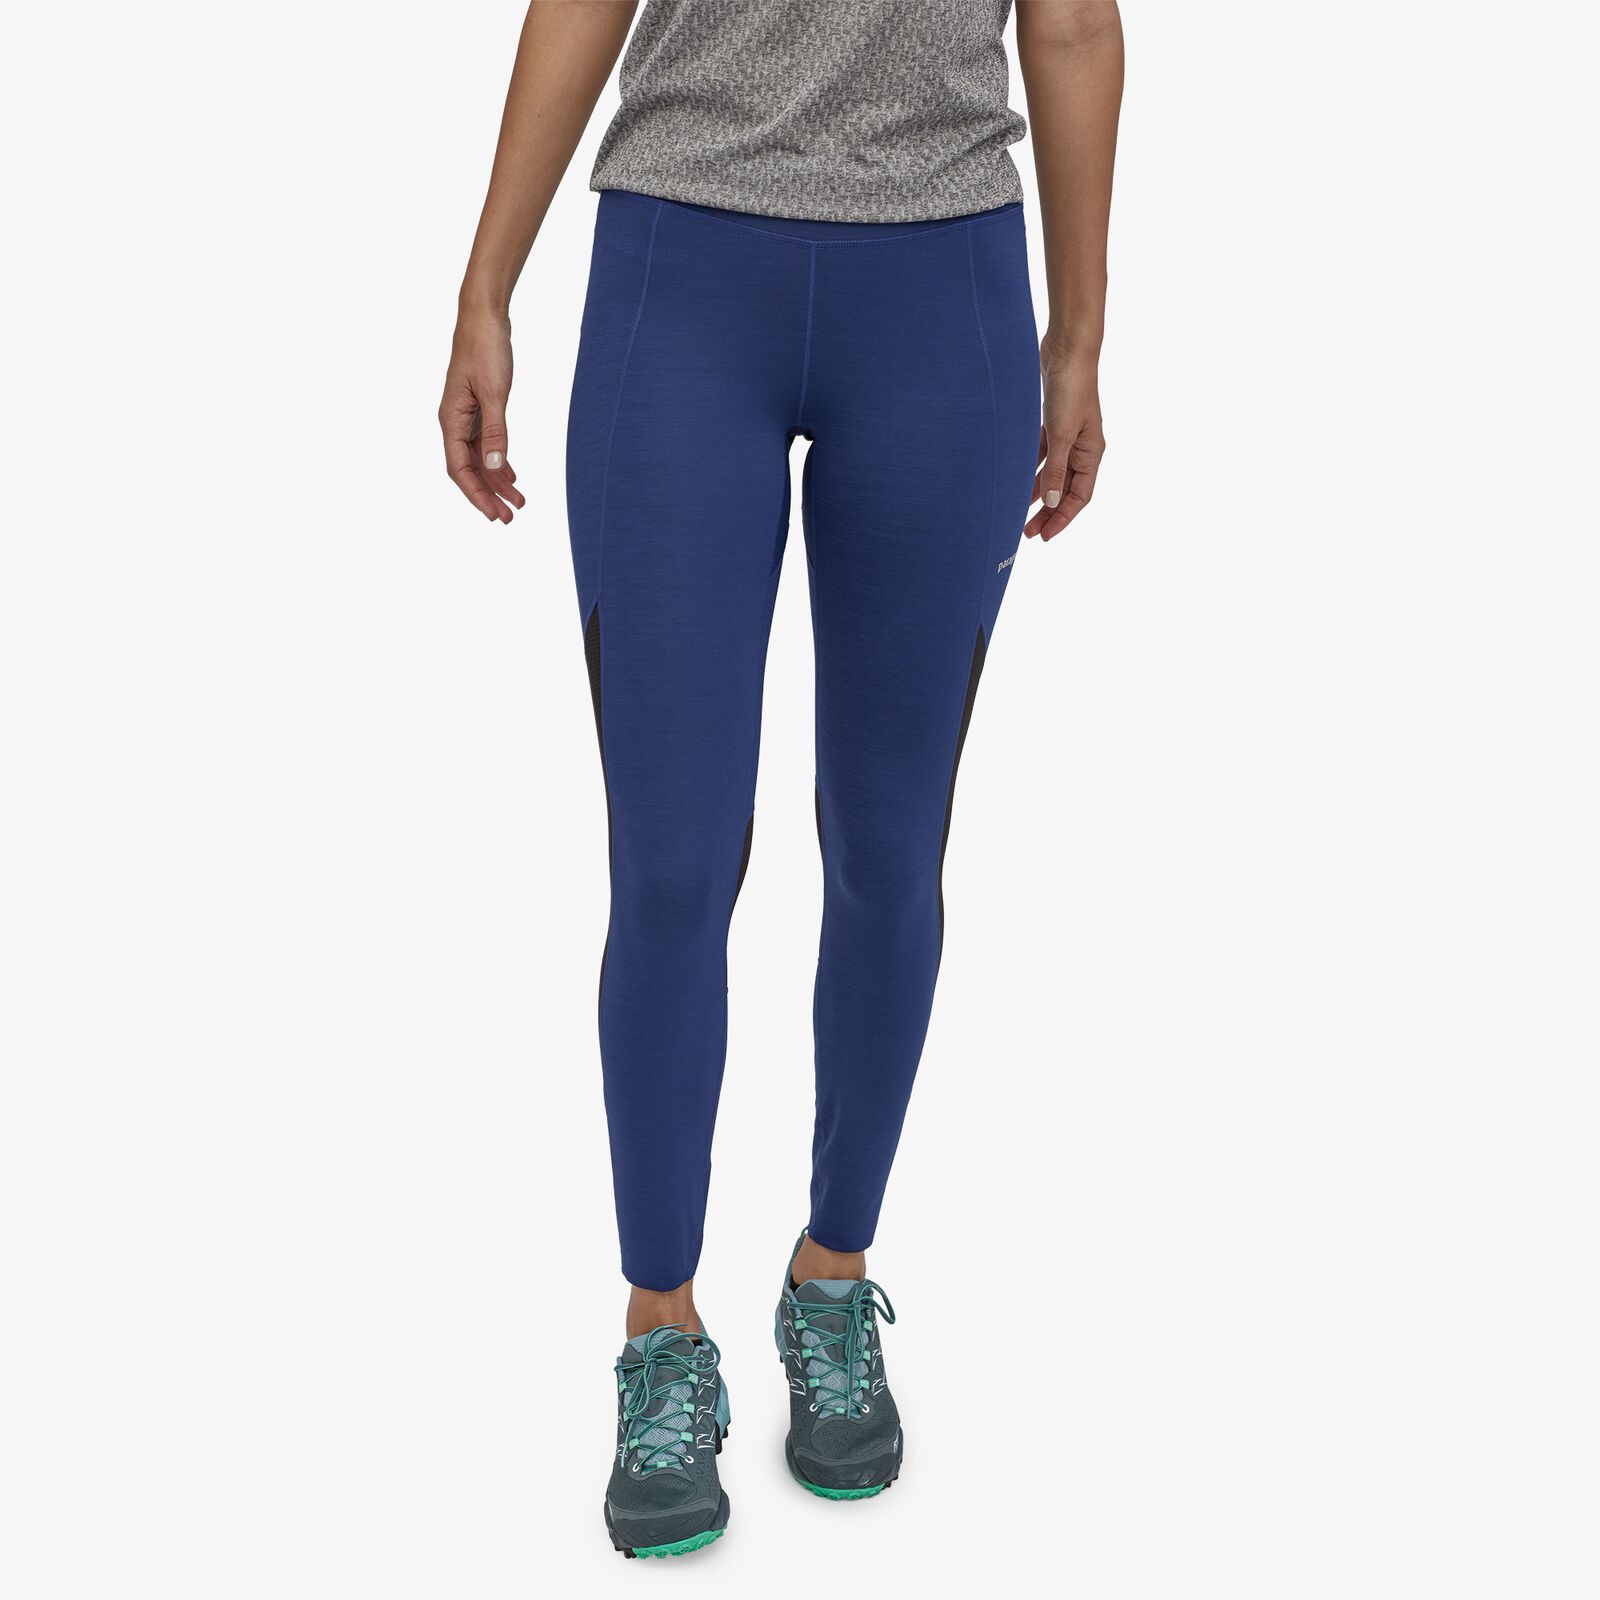 Women's Yoga Clothing & Activewear by Patagonia